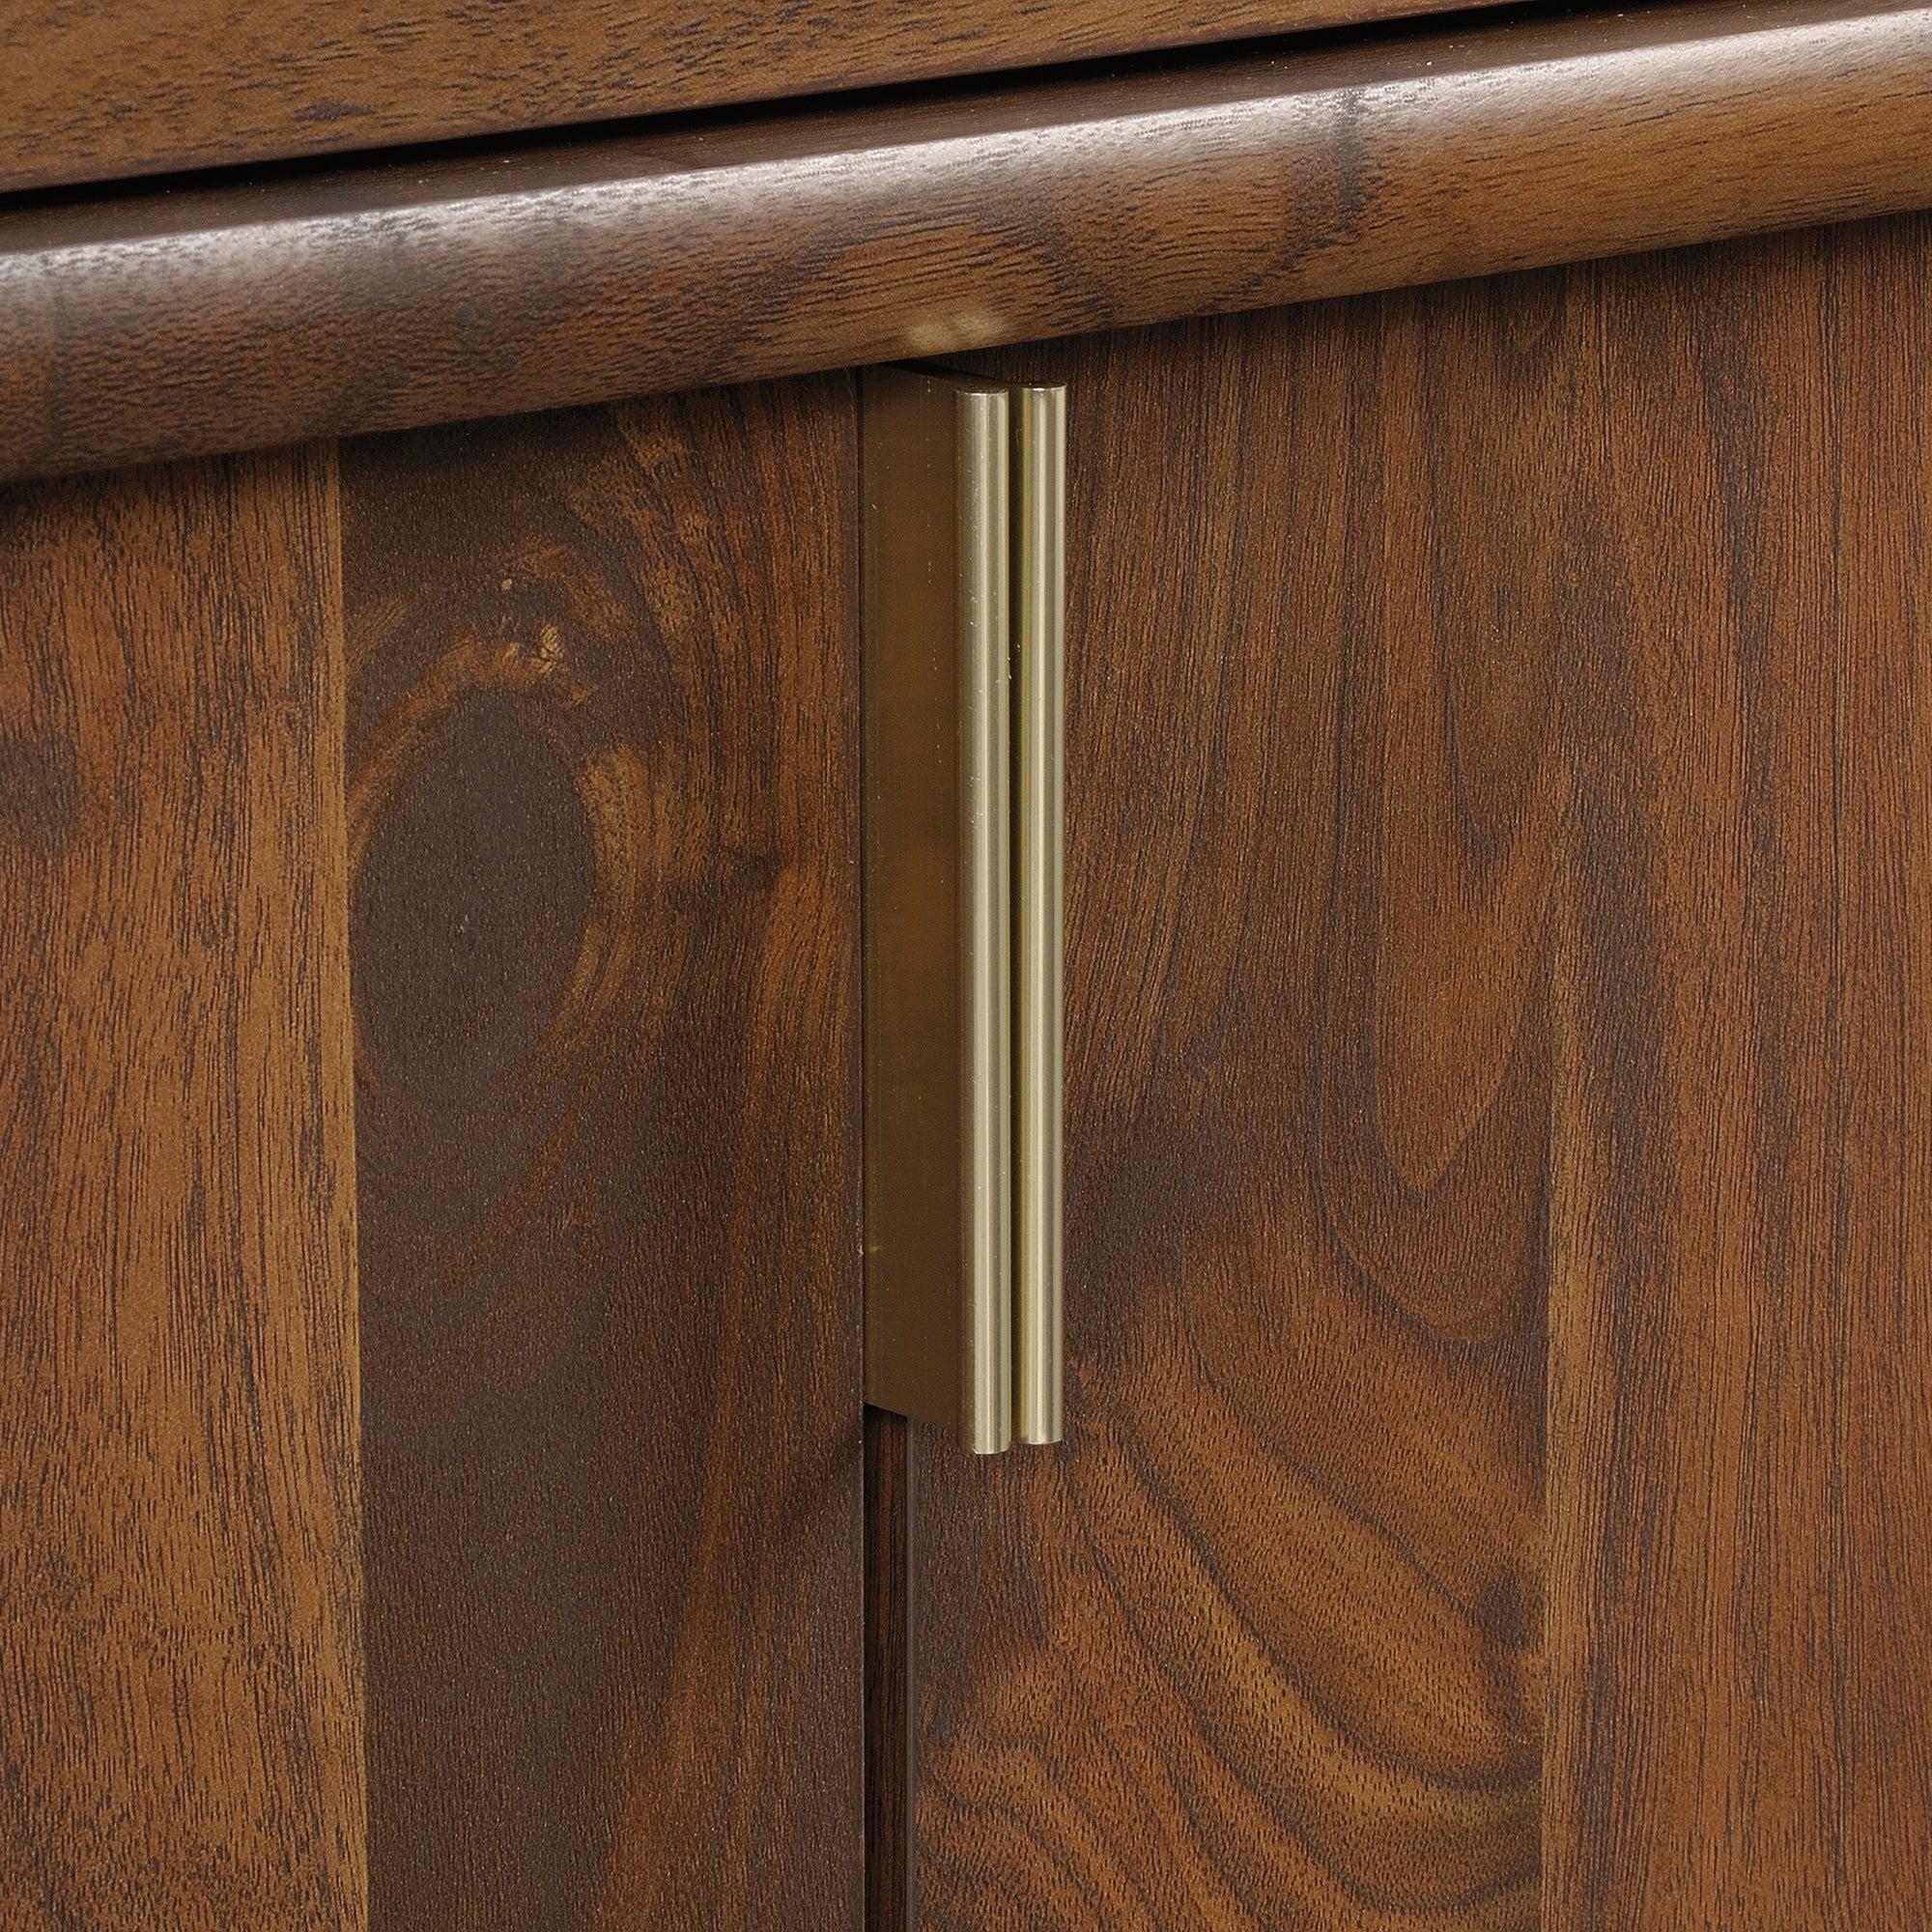 Clifton place storage sideboard - image 4